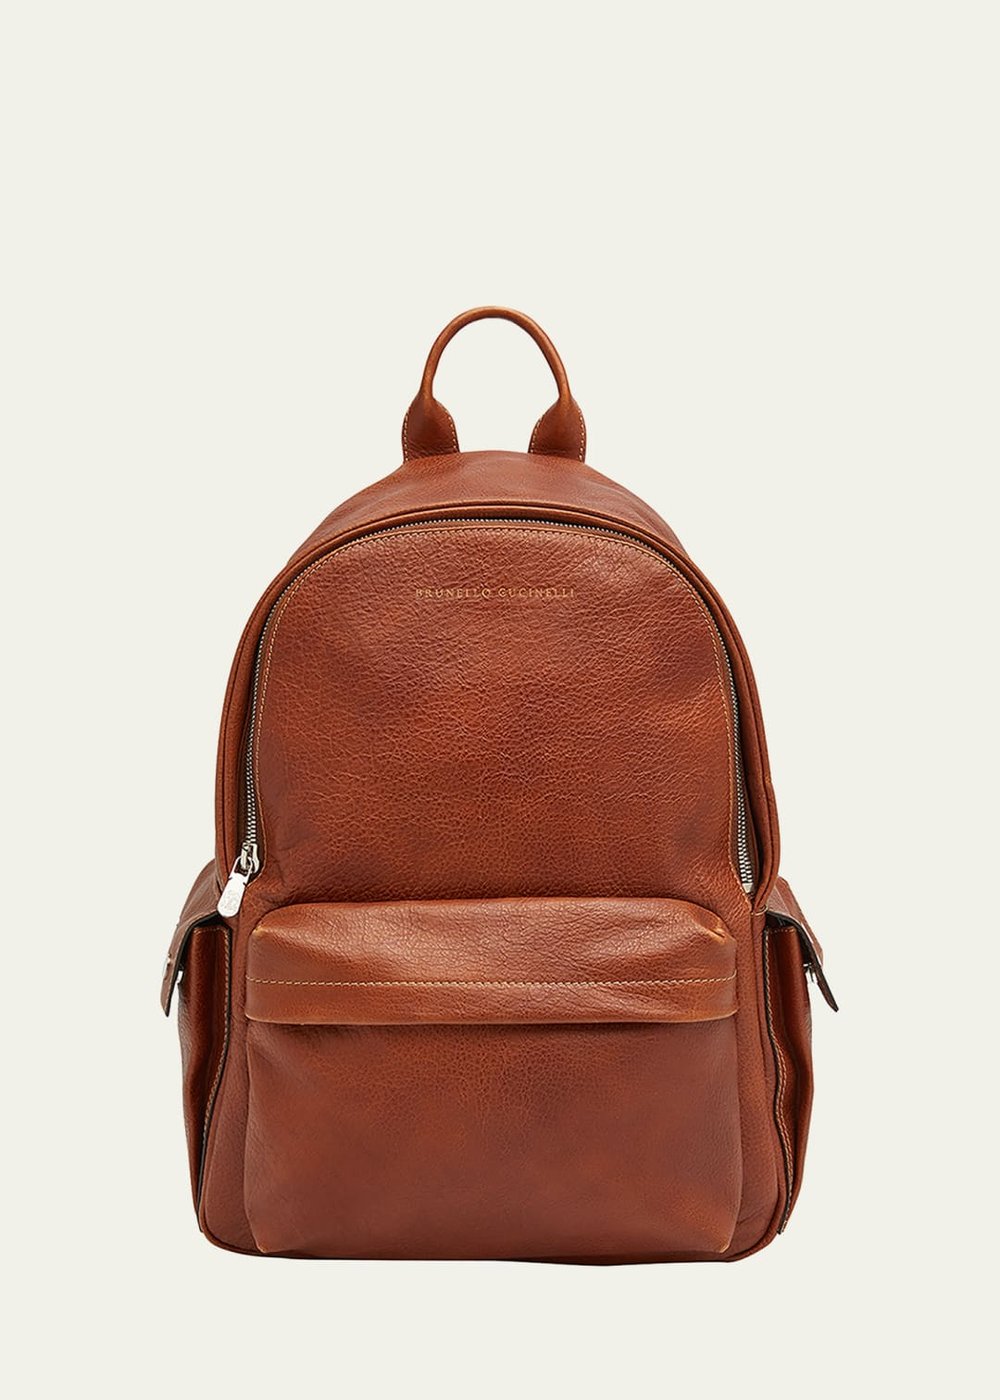 Brunello Cucinelli Mens Grained Leather Backpack